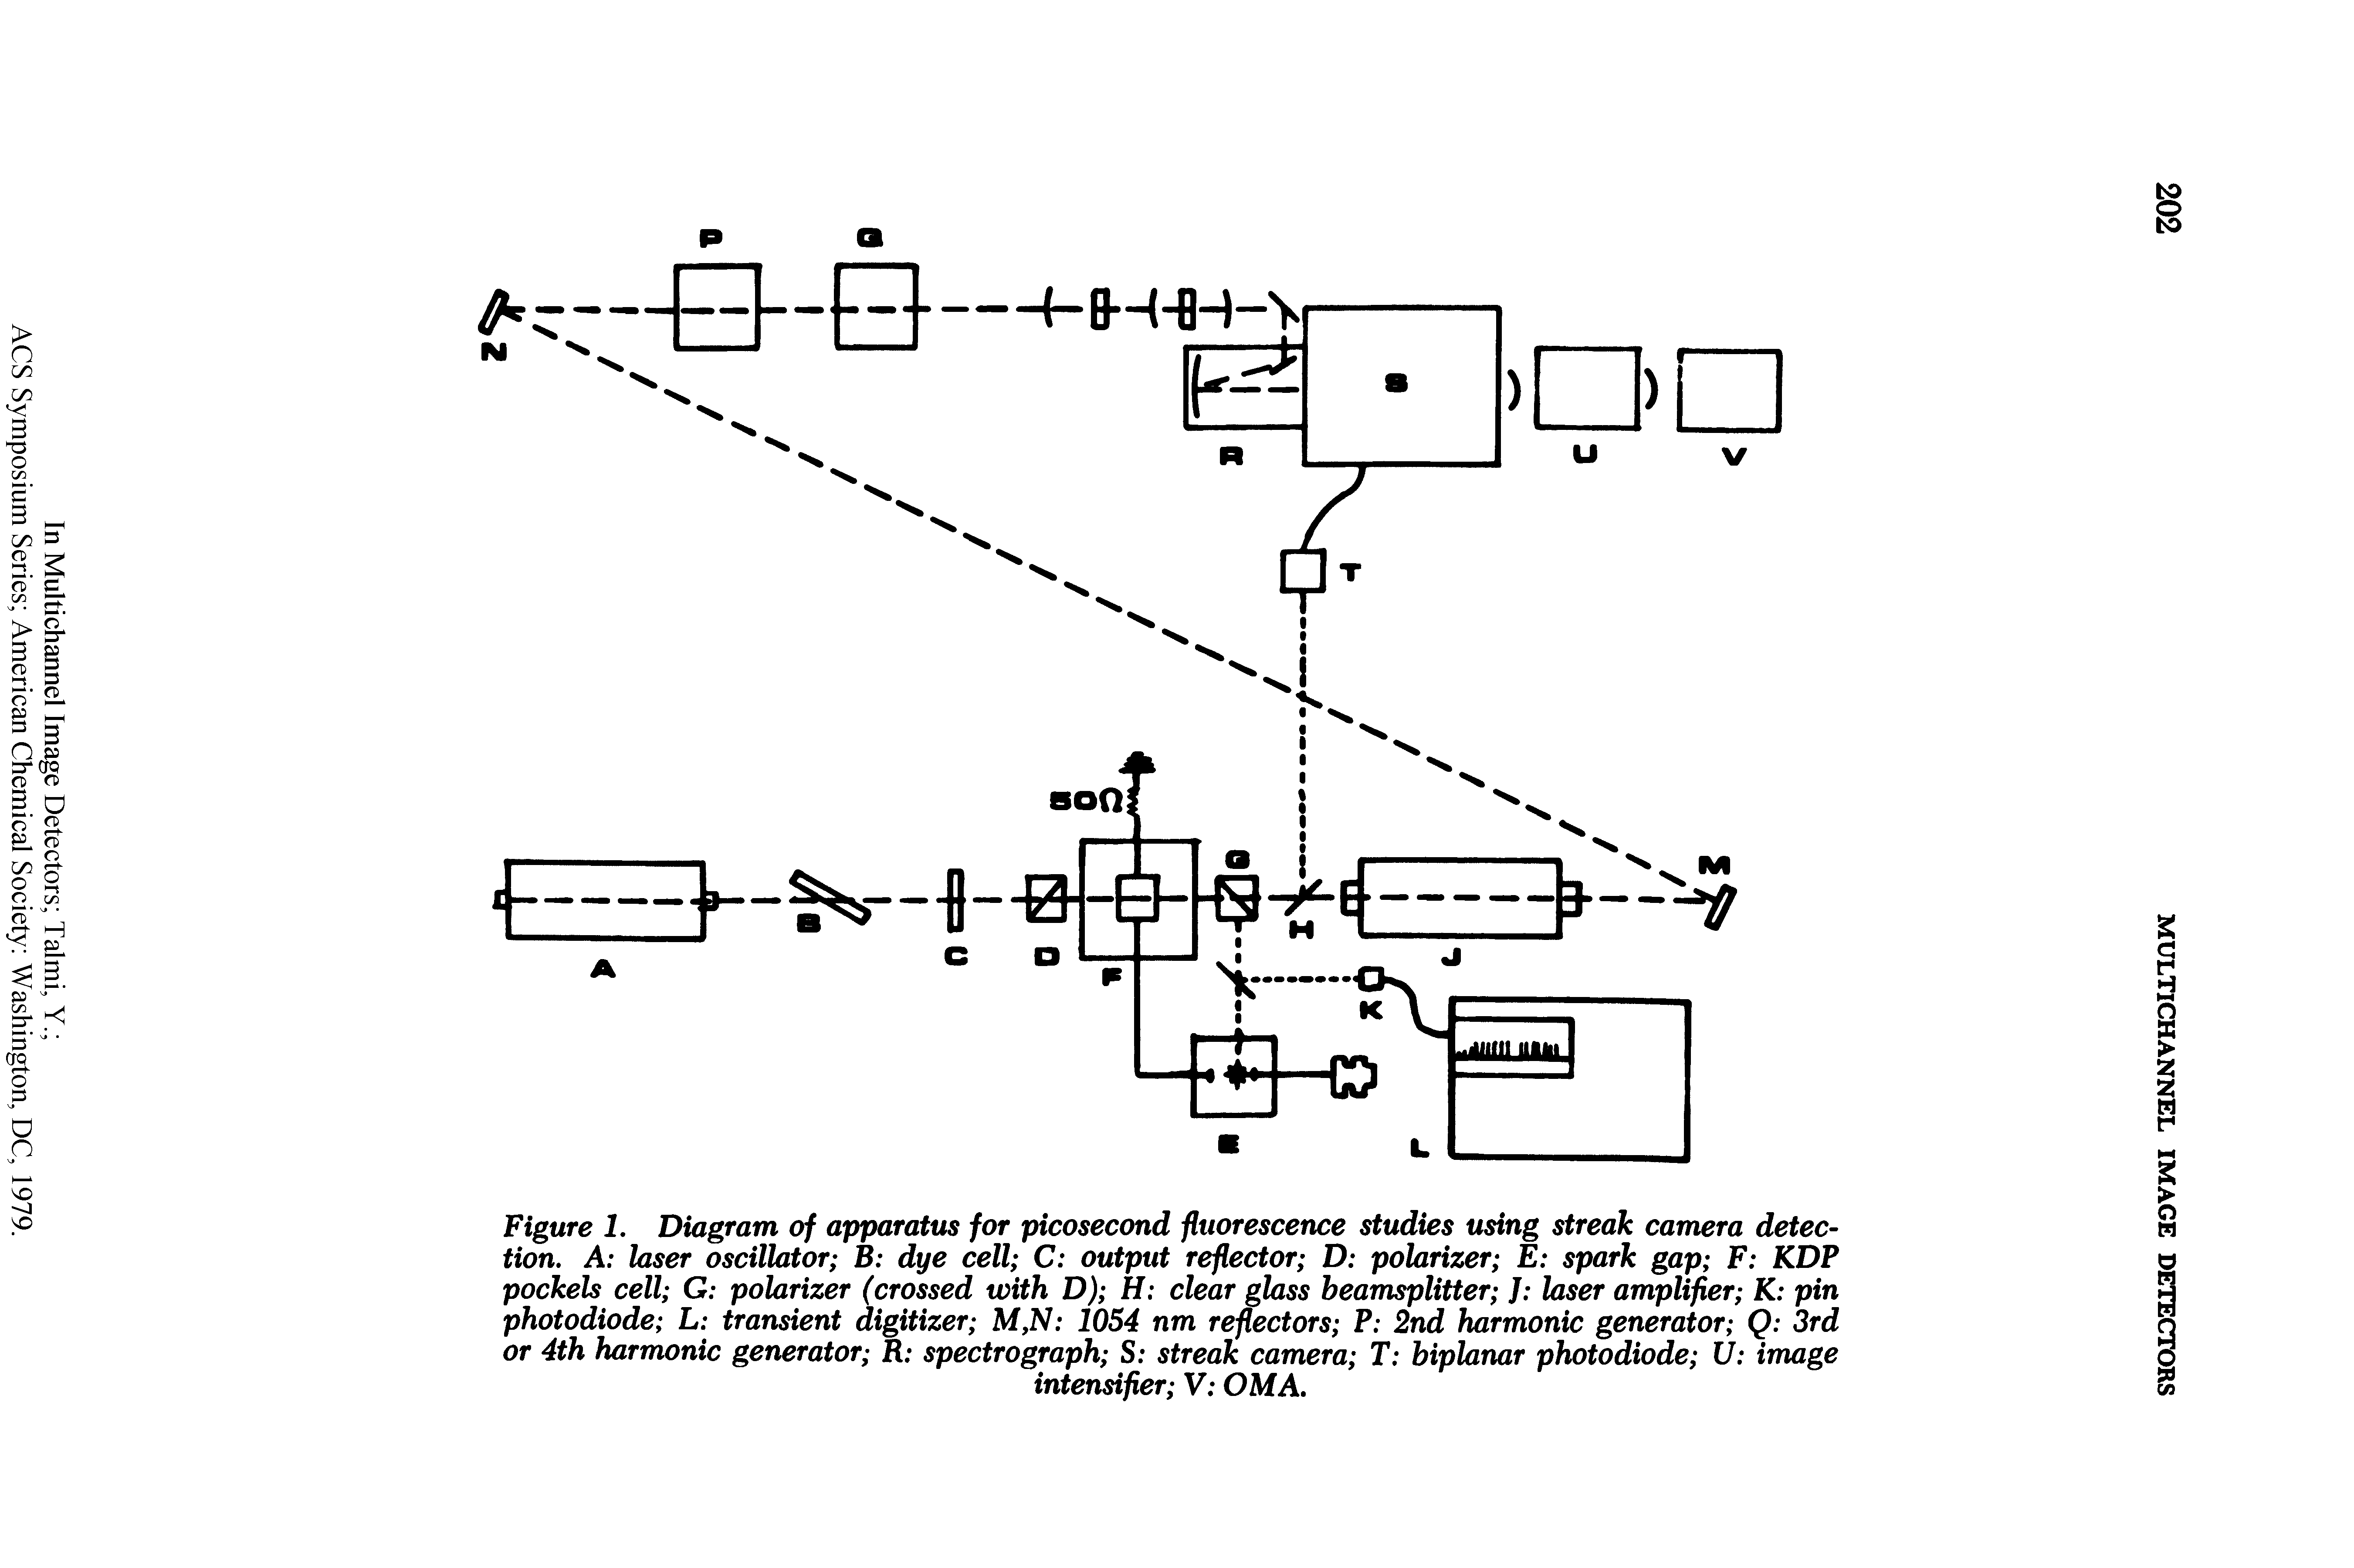 Figure 1. Diagram of apparatus for picosecond fluorescence studies using streak camera detection. A laser oscillator B dye cell C output reflector D polarizer E spark gap F KDP pockels cell G polarizer (crossed with D) H clear glass beamsplitter J laser amplifier K pin photodiode L transient digitizer M,N 1054 nm reflectors P 2nd harmonic generator Q 3rd or 4th harmonic generator R spectrograph S streak camera T biplanar photodiode U image...